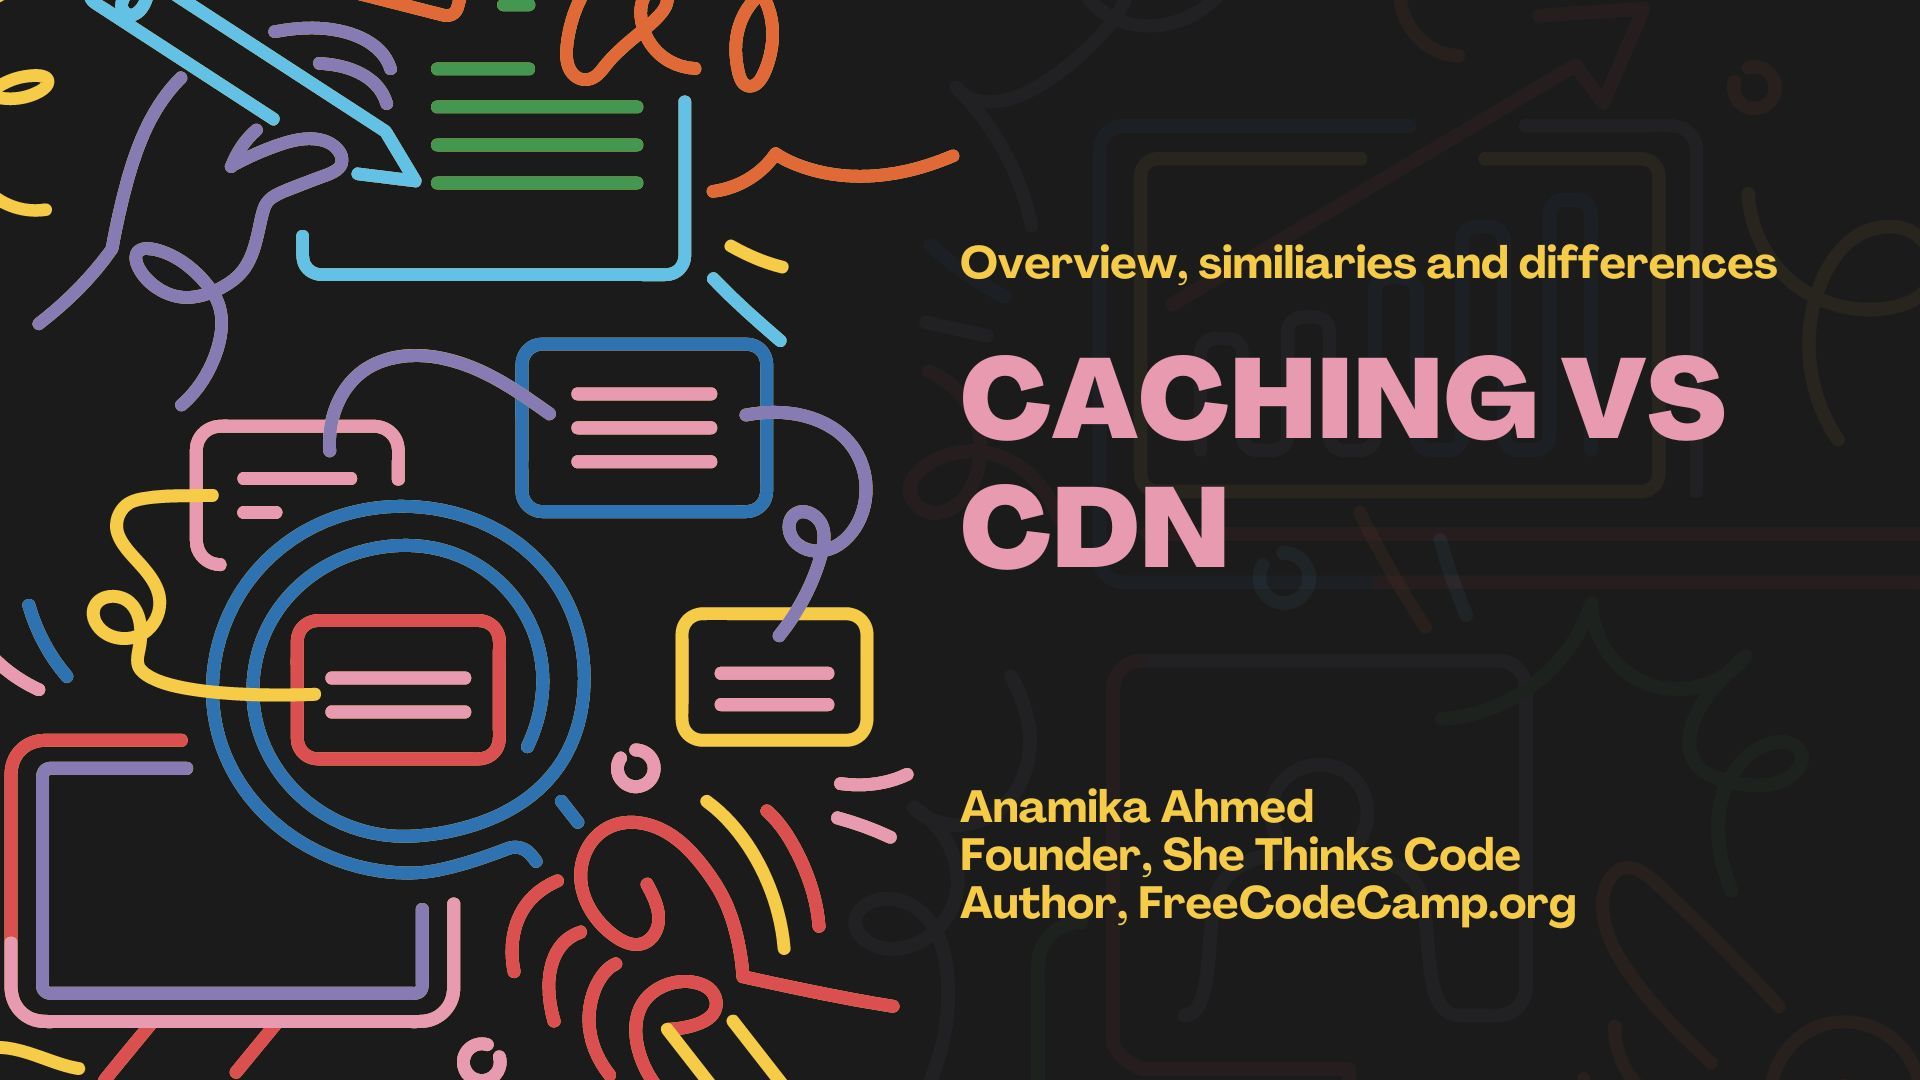 Caching vs Content Delivery Networks – What’s the Difference?